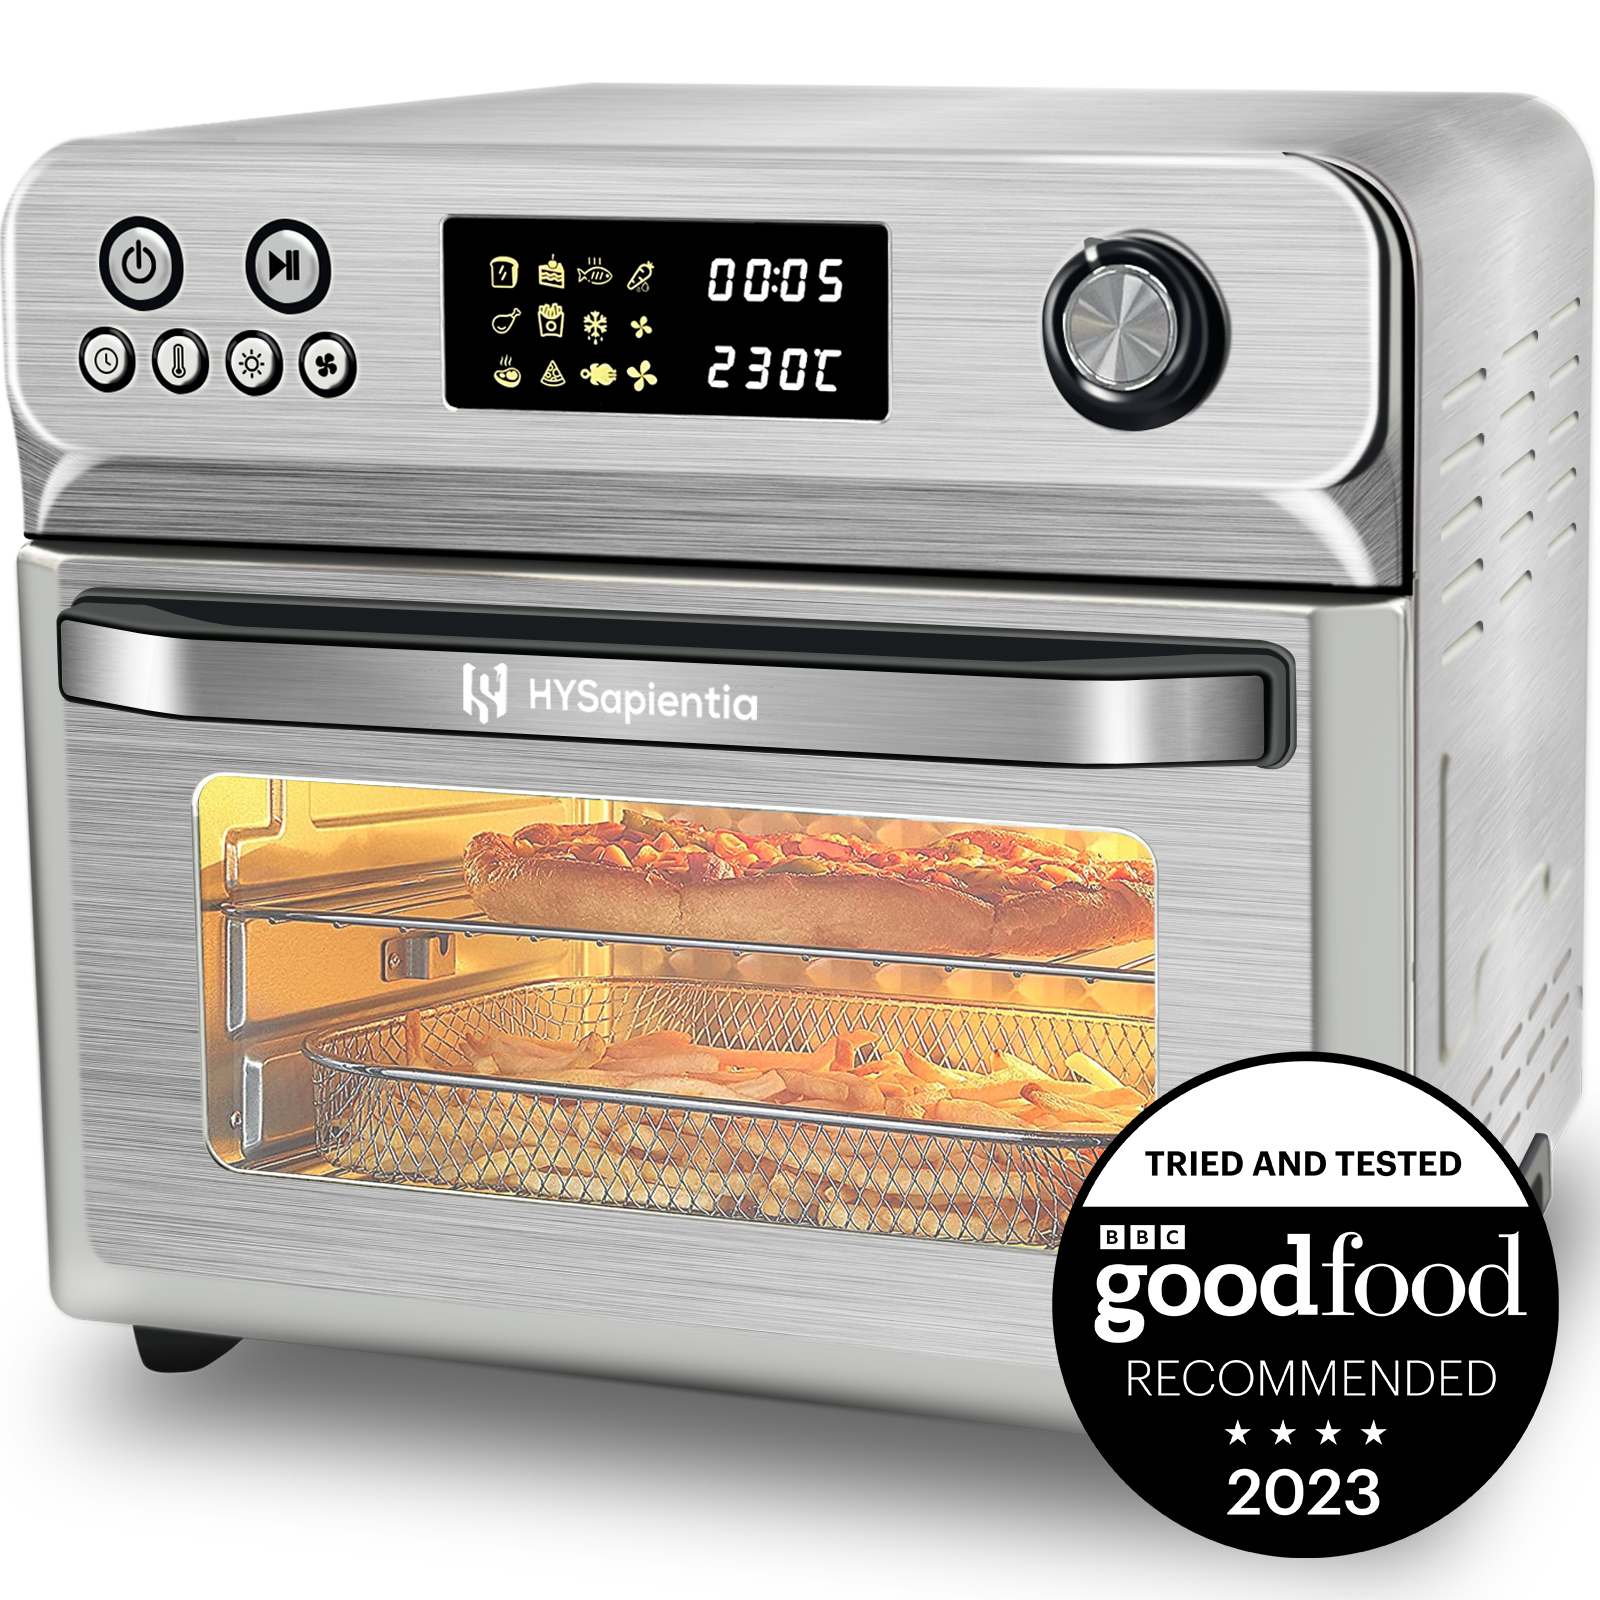 HYSapientia Air Fryer Oven Highly Recommended by BBC Good Food